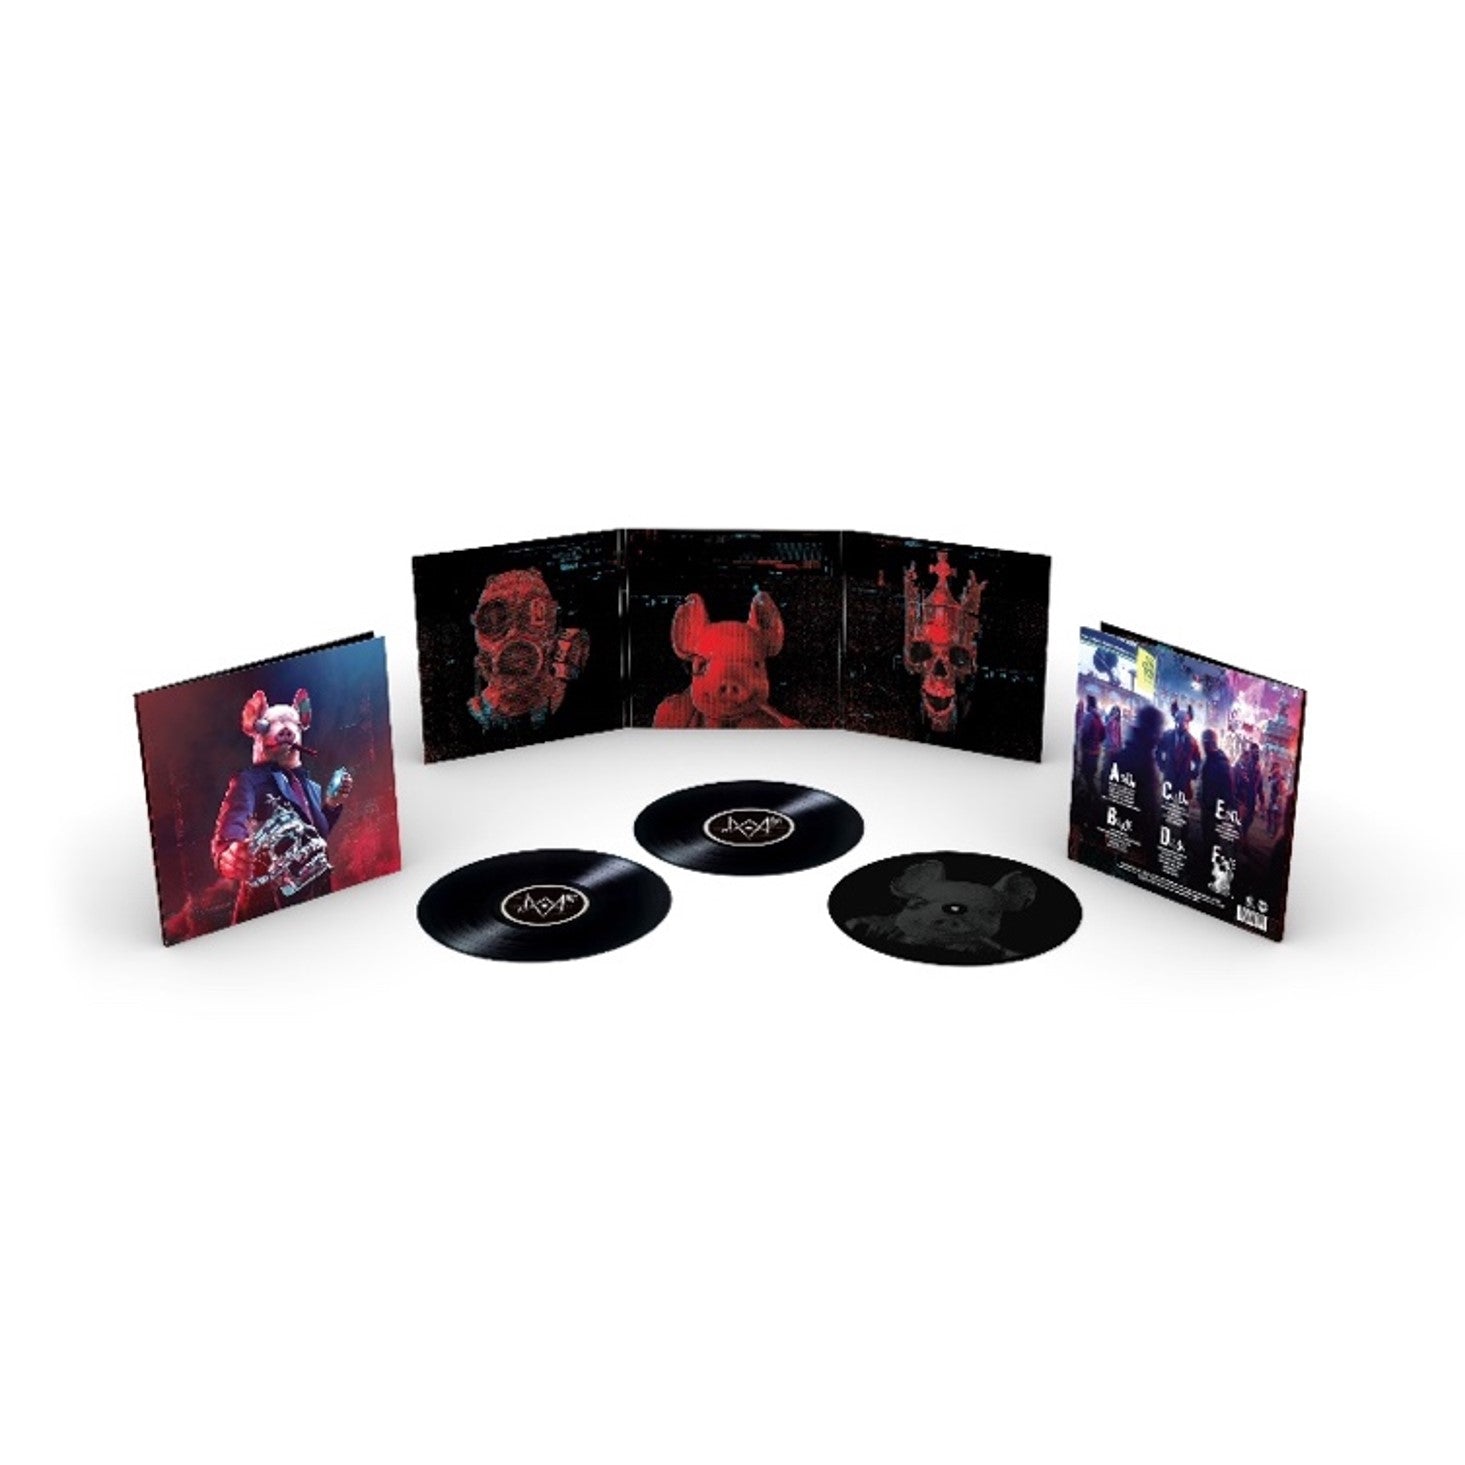 THE OUTLAST TRIALS Soundtrack Streaming on Music Services & Vinyl